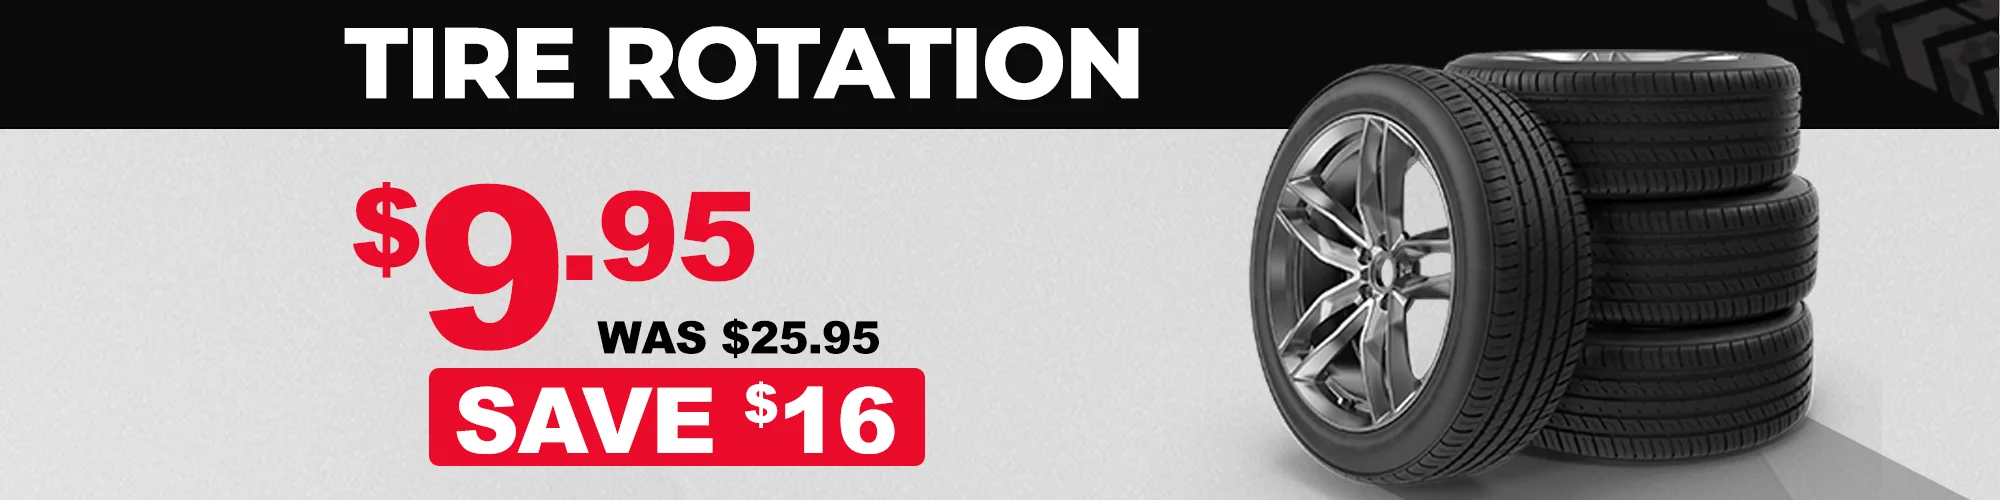 Tire rotation $9.95, was $25.95. Save $16